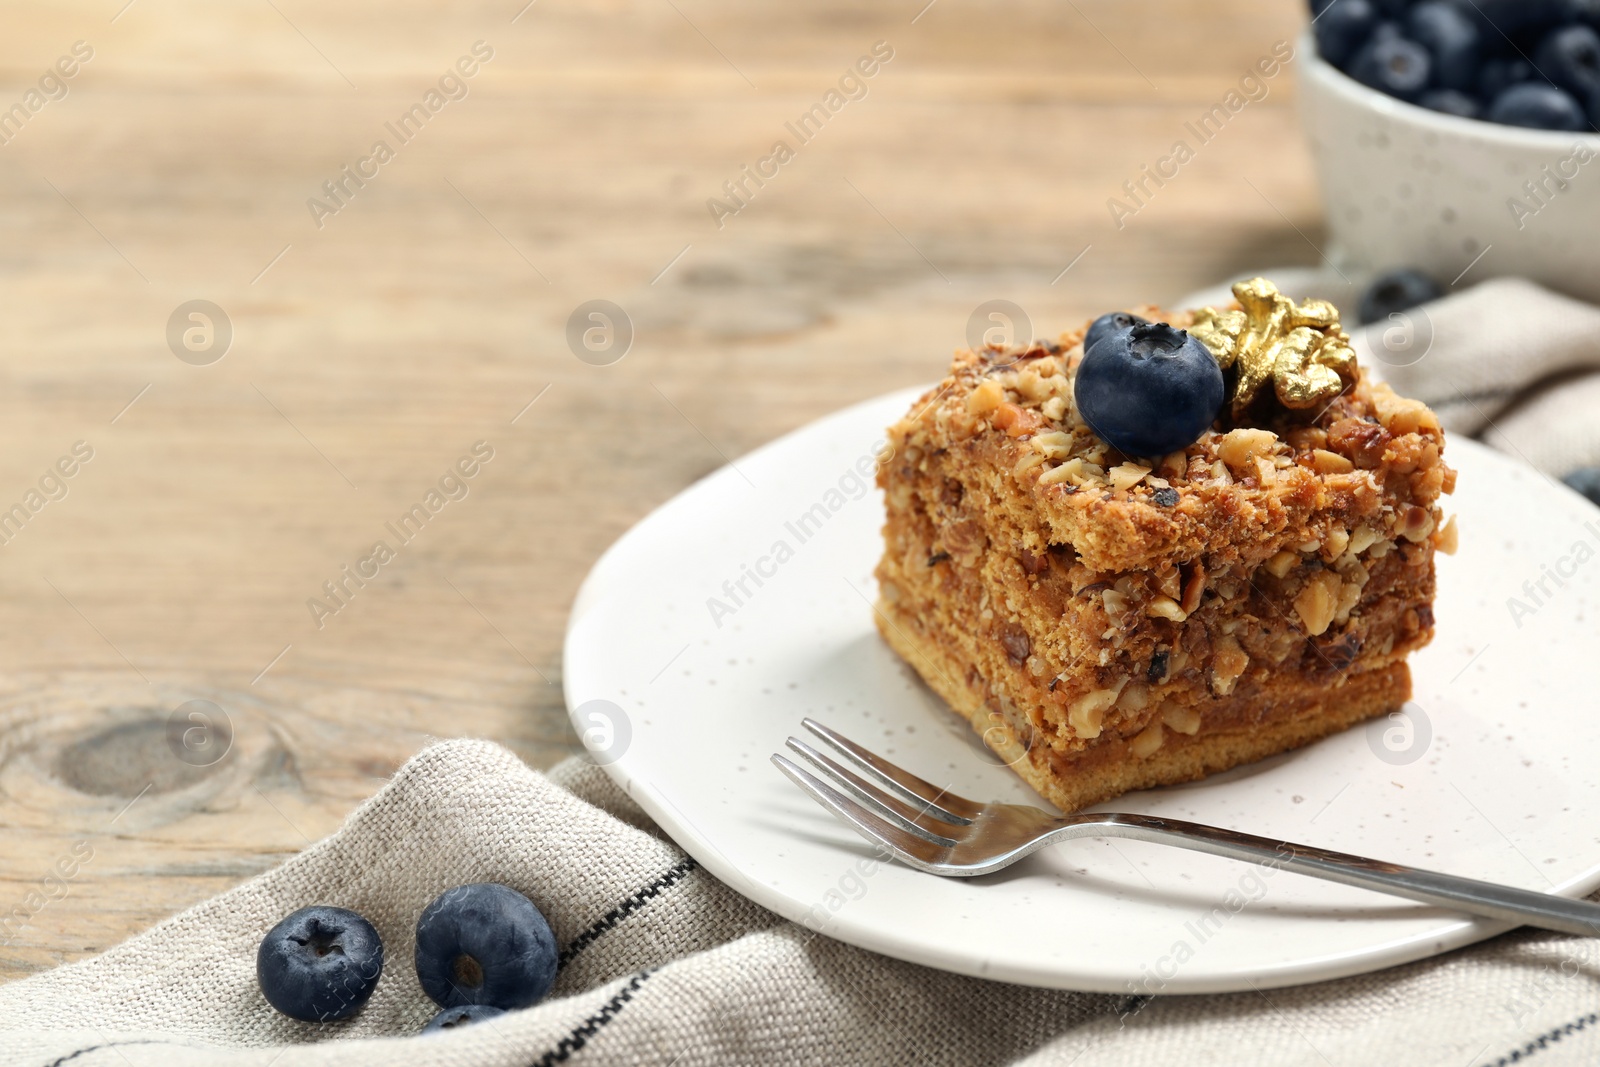 Photo of Piece of delicious layered honey cake with blueberries and nuts served on wooden table, closeup. Space for text